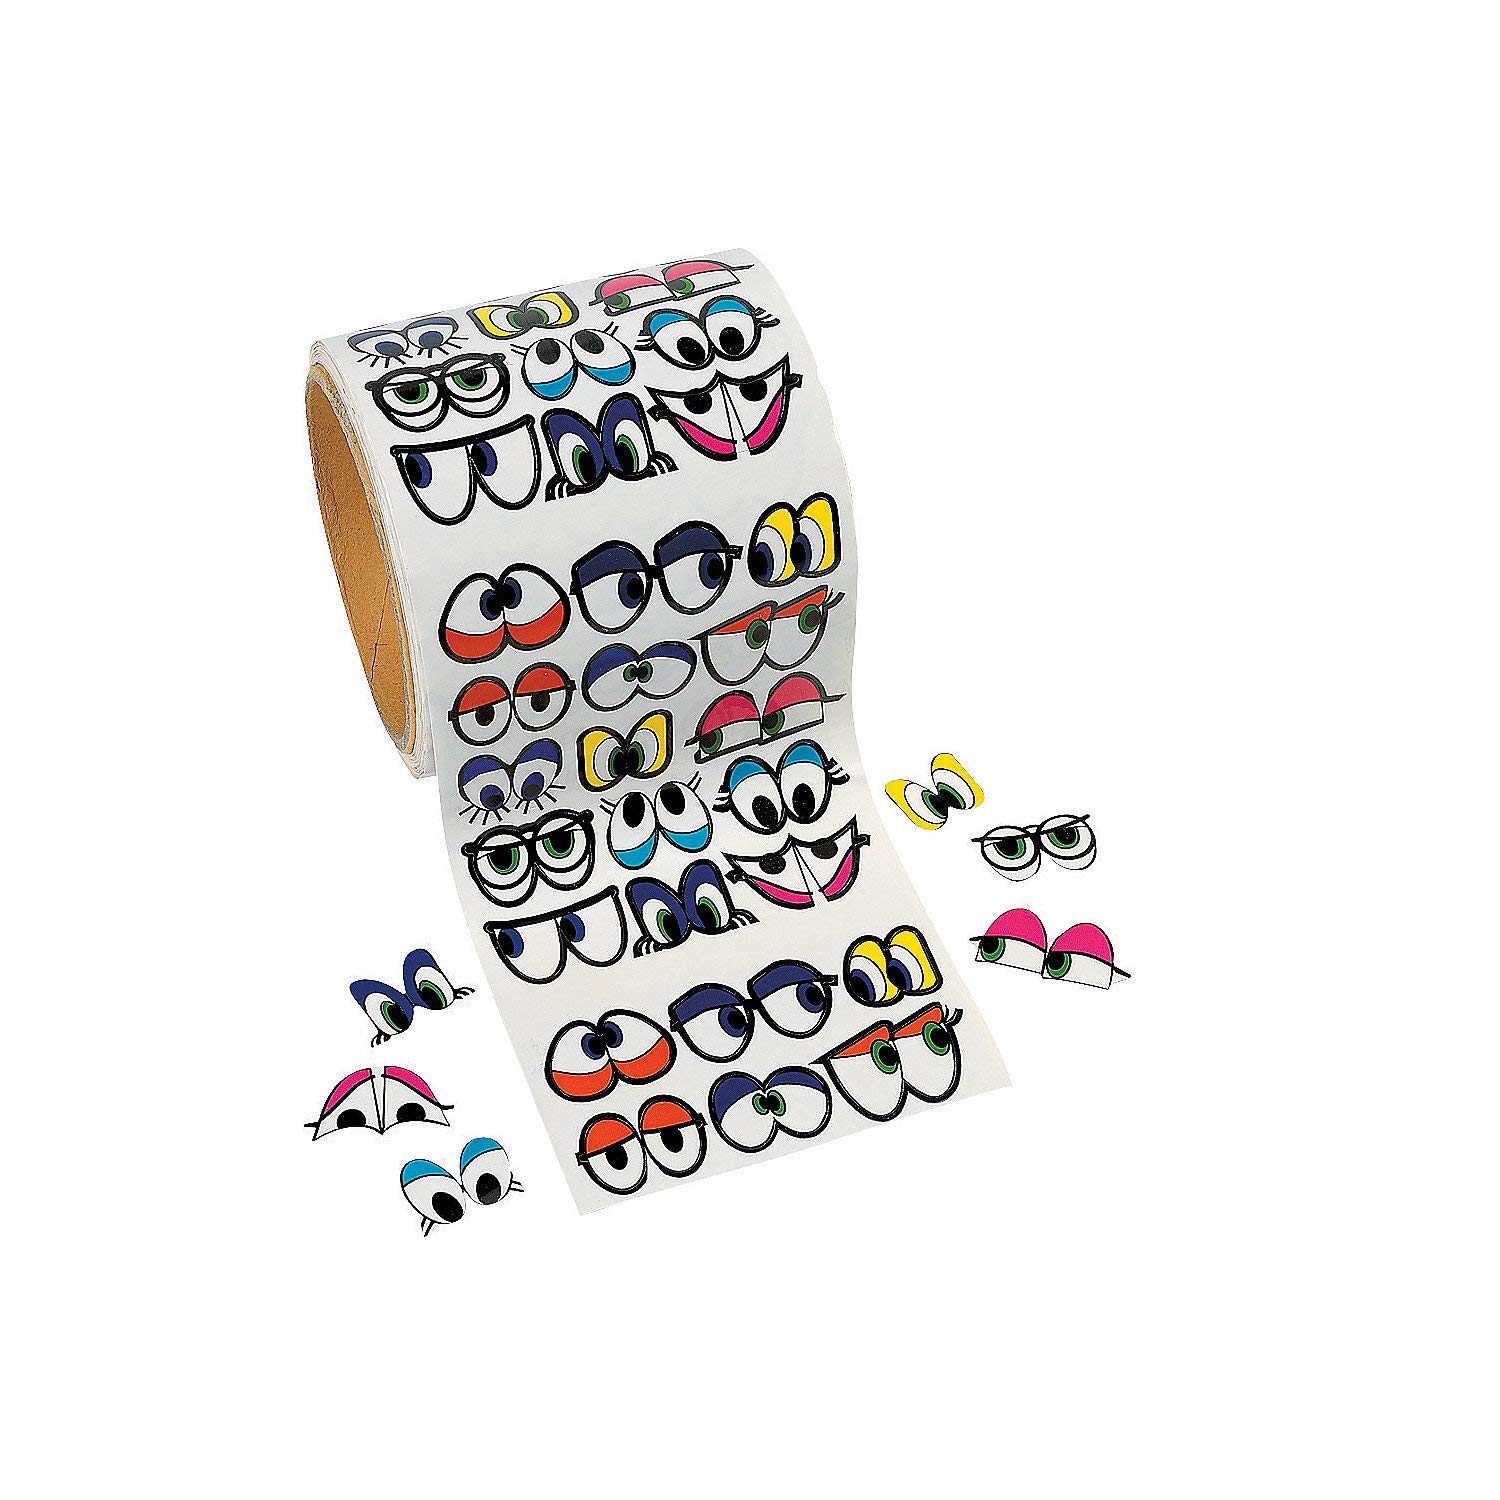 Book Cover Cute Colored Eye Stickers - Cartoon Stickers - Scrapbook Stickers - Fun Eyeball Stickers - Novelty Stickers - DIY Arts & Crafts - Assorted 1005 Eyes Stickers - 1 Sticker Roll - Stationary Decoration